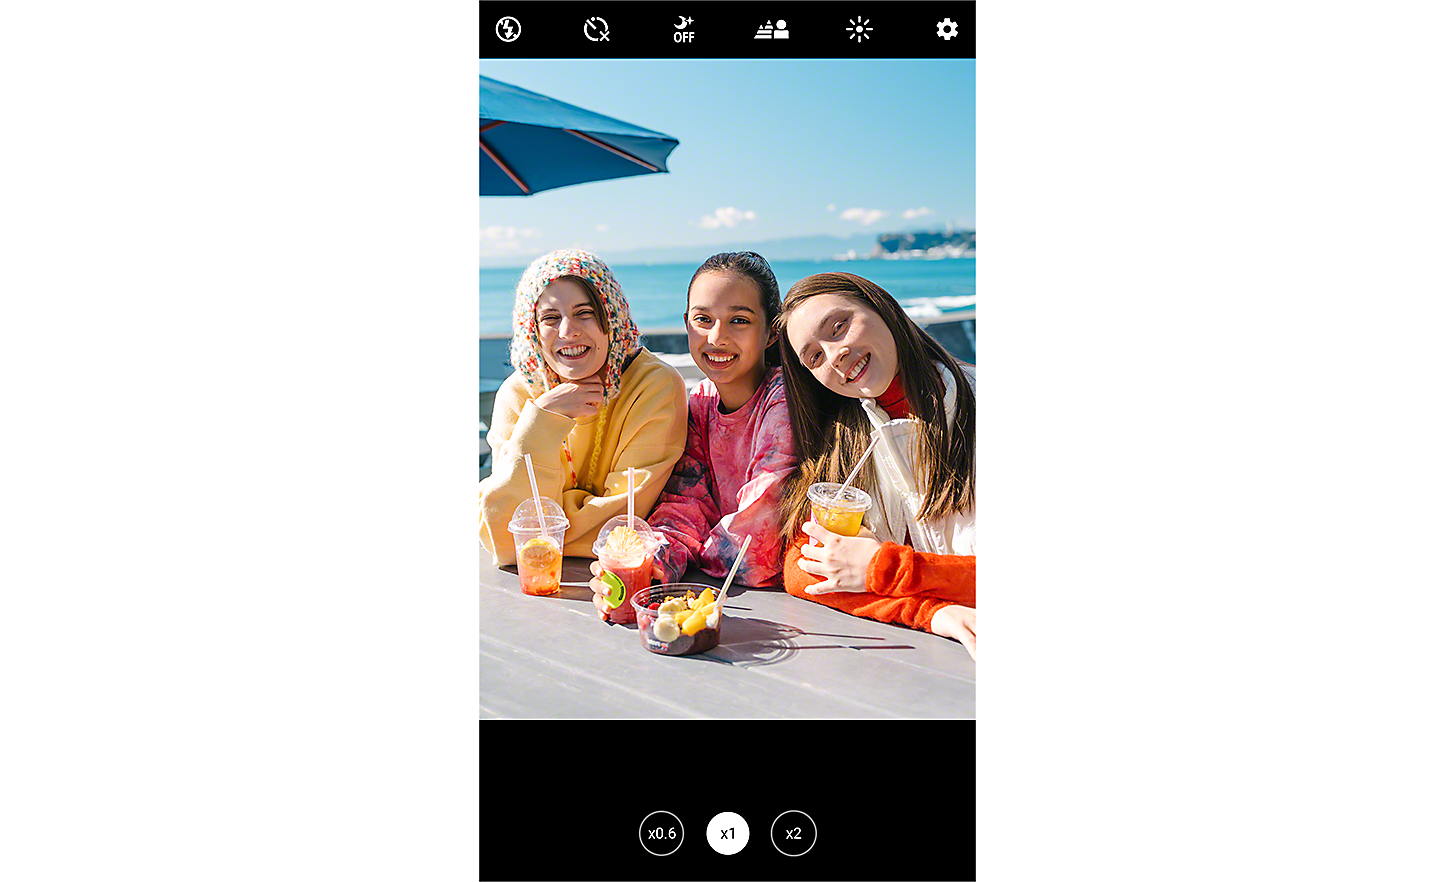 Screenshot showing an image of three young women smiling at the camera, seated at a table overlooking the sea